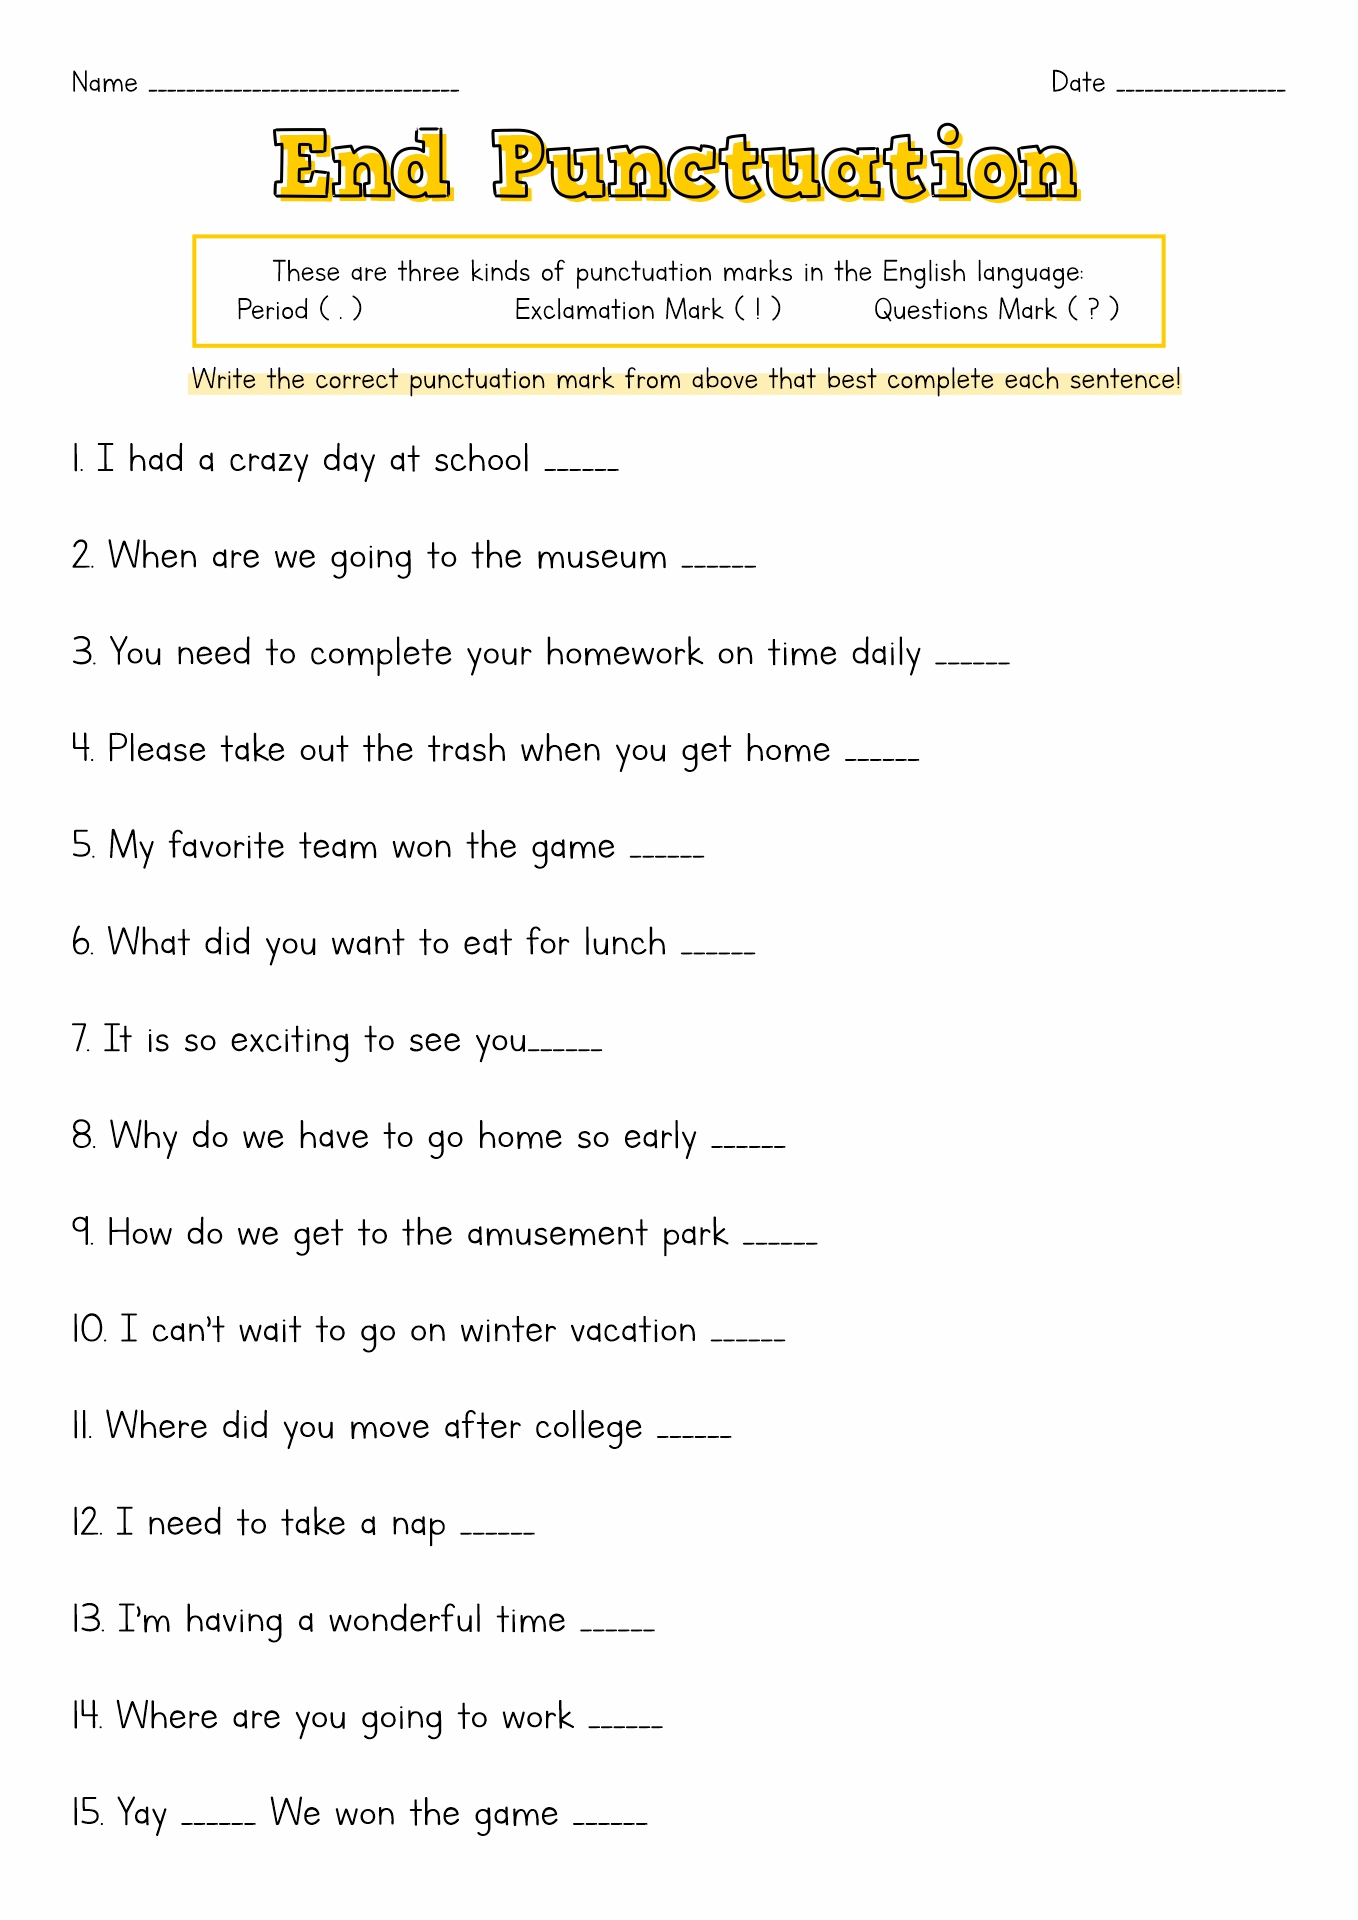 Punctuation Worksheets High School Image